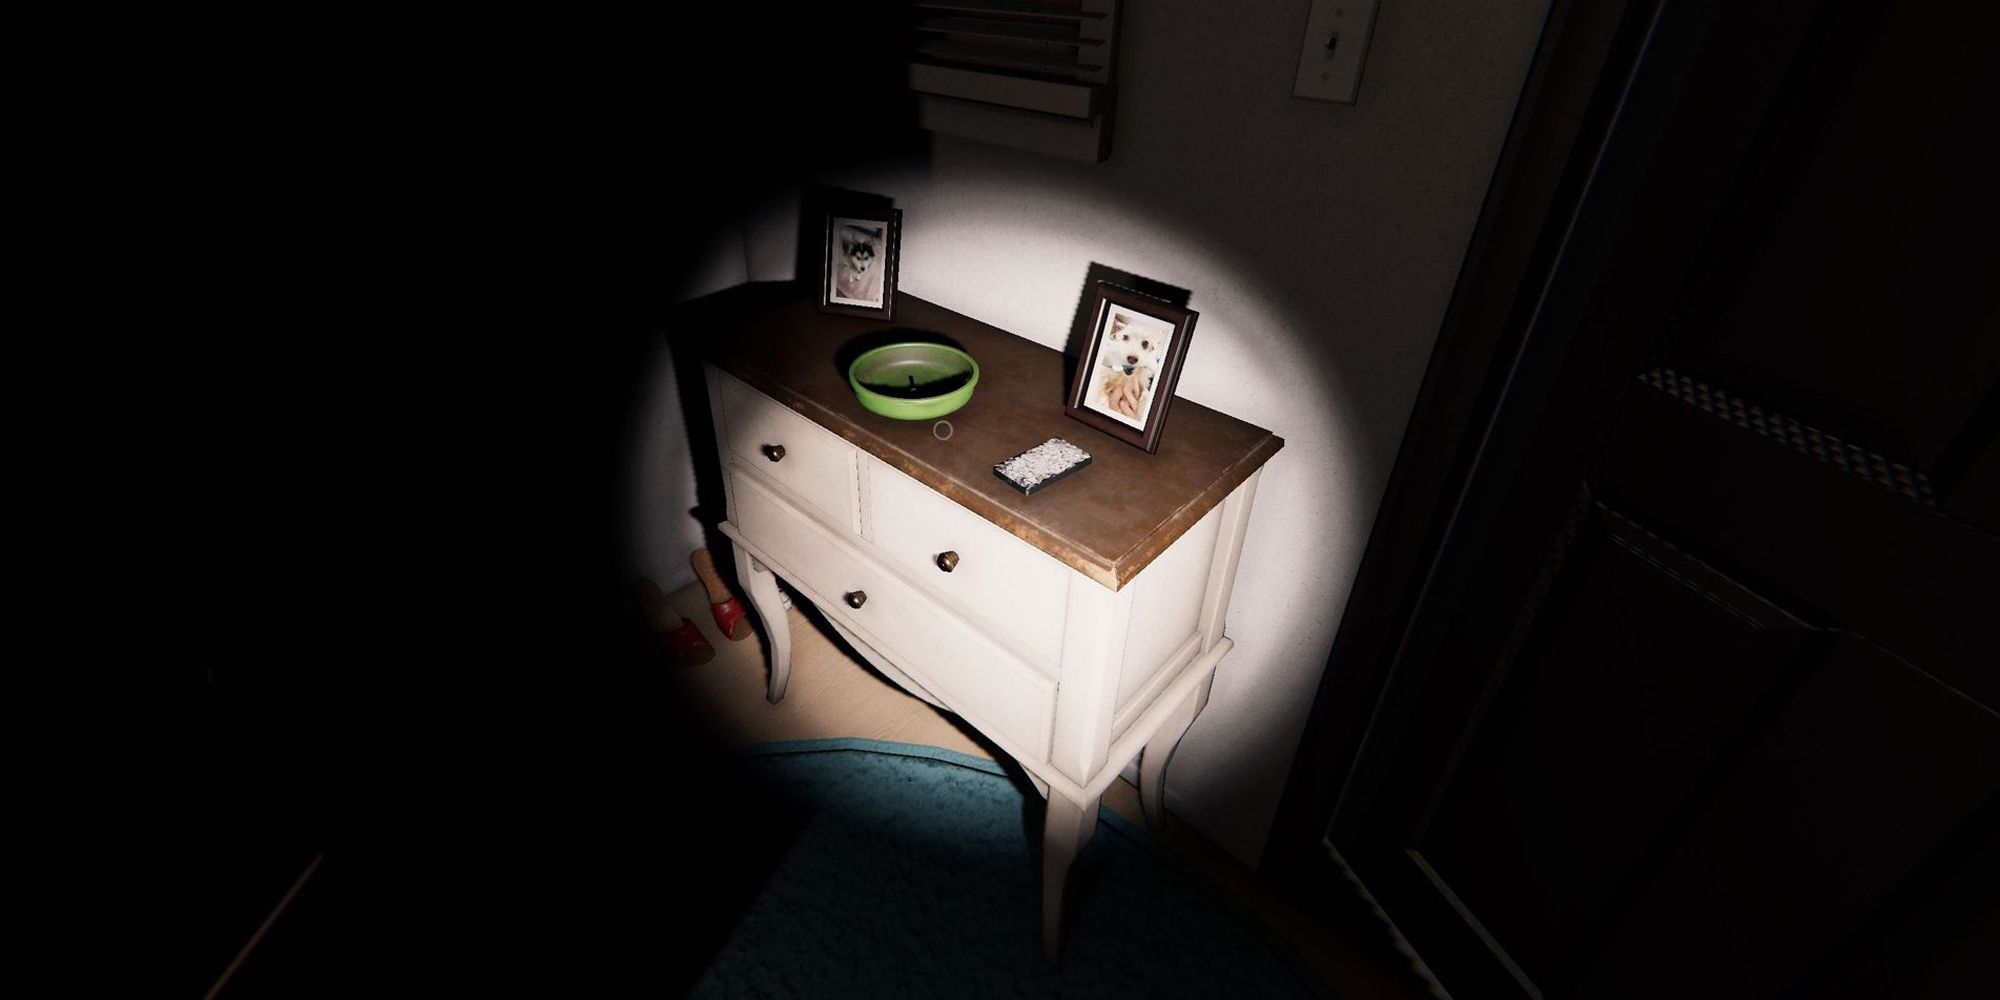 Image depicts a box of tarot cards on a wooden dresser next to the front door on Edgefield House in Phasmophobia. There are two photo frames and a green bowl on this dresser too.